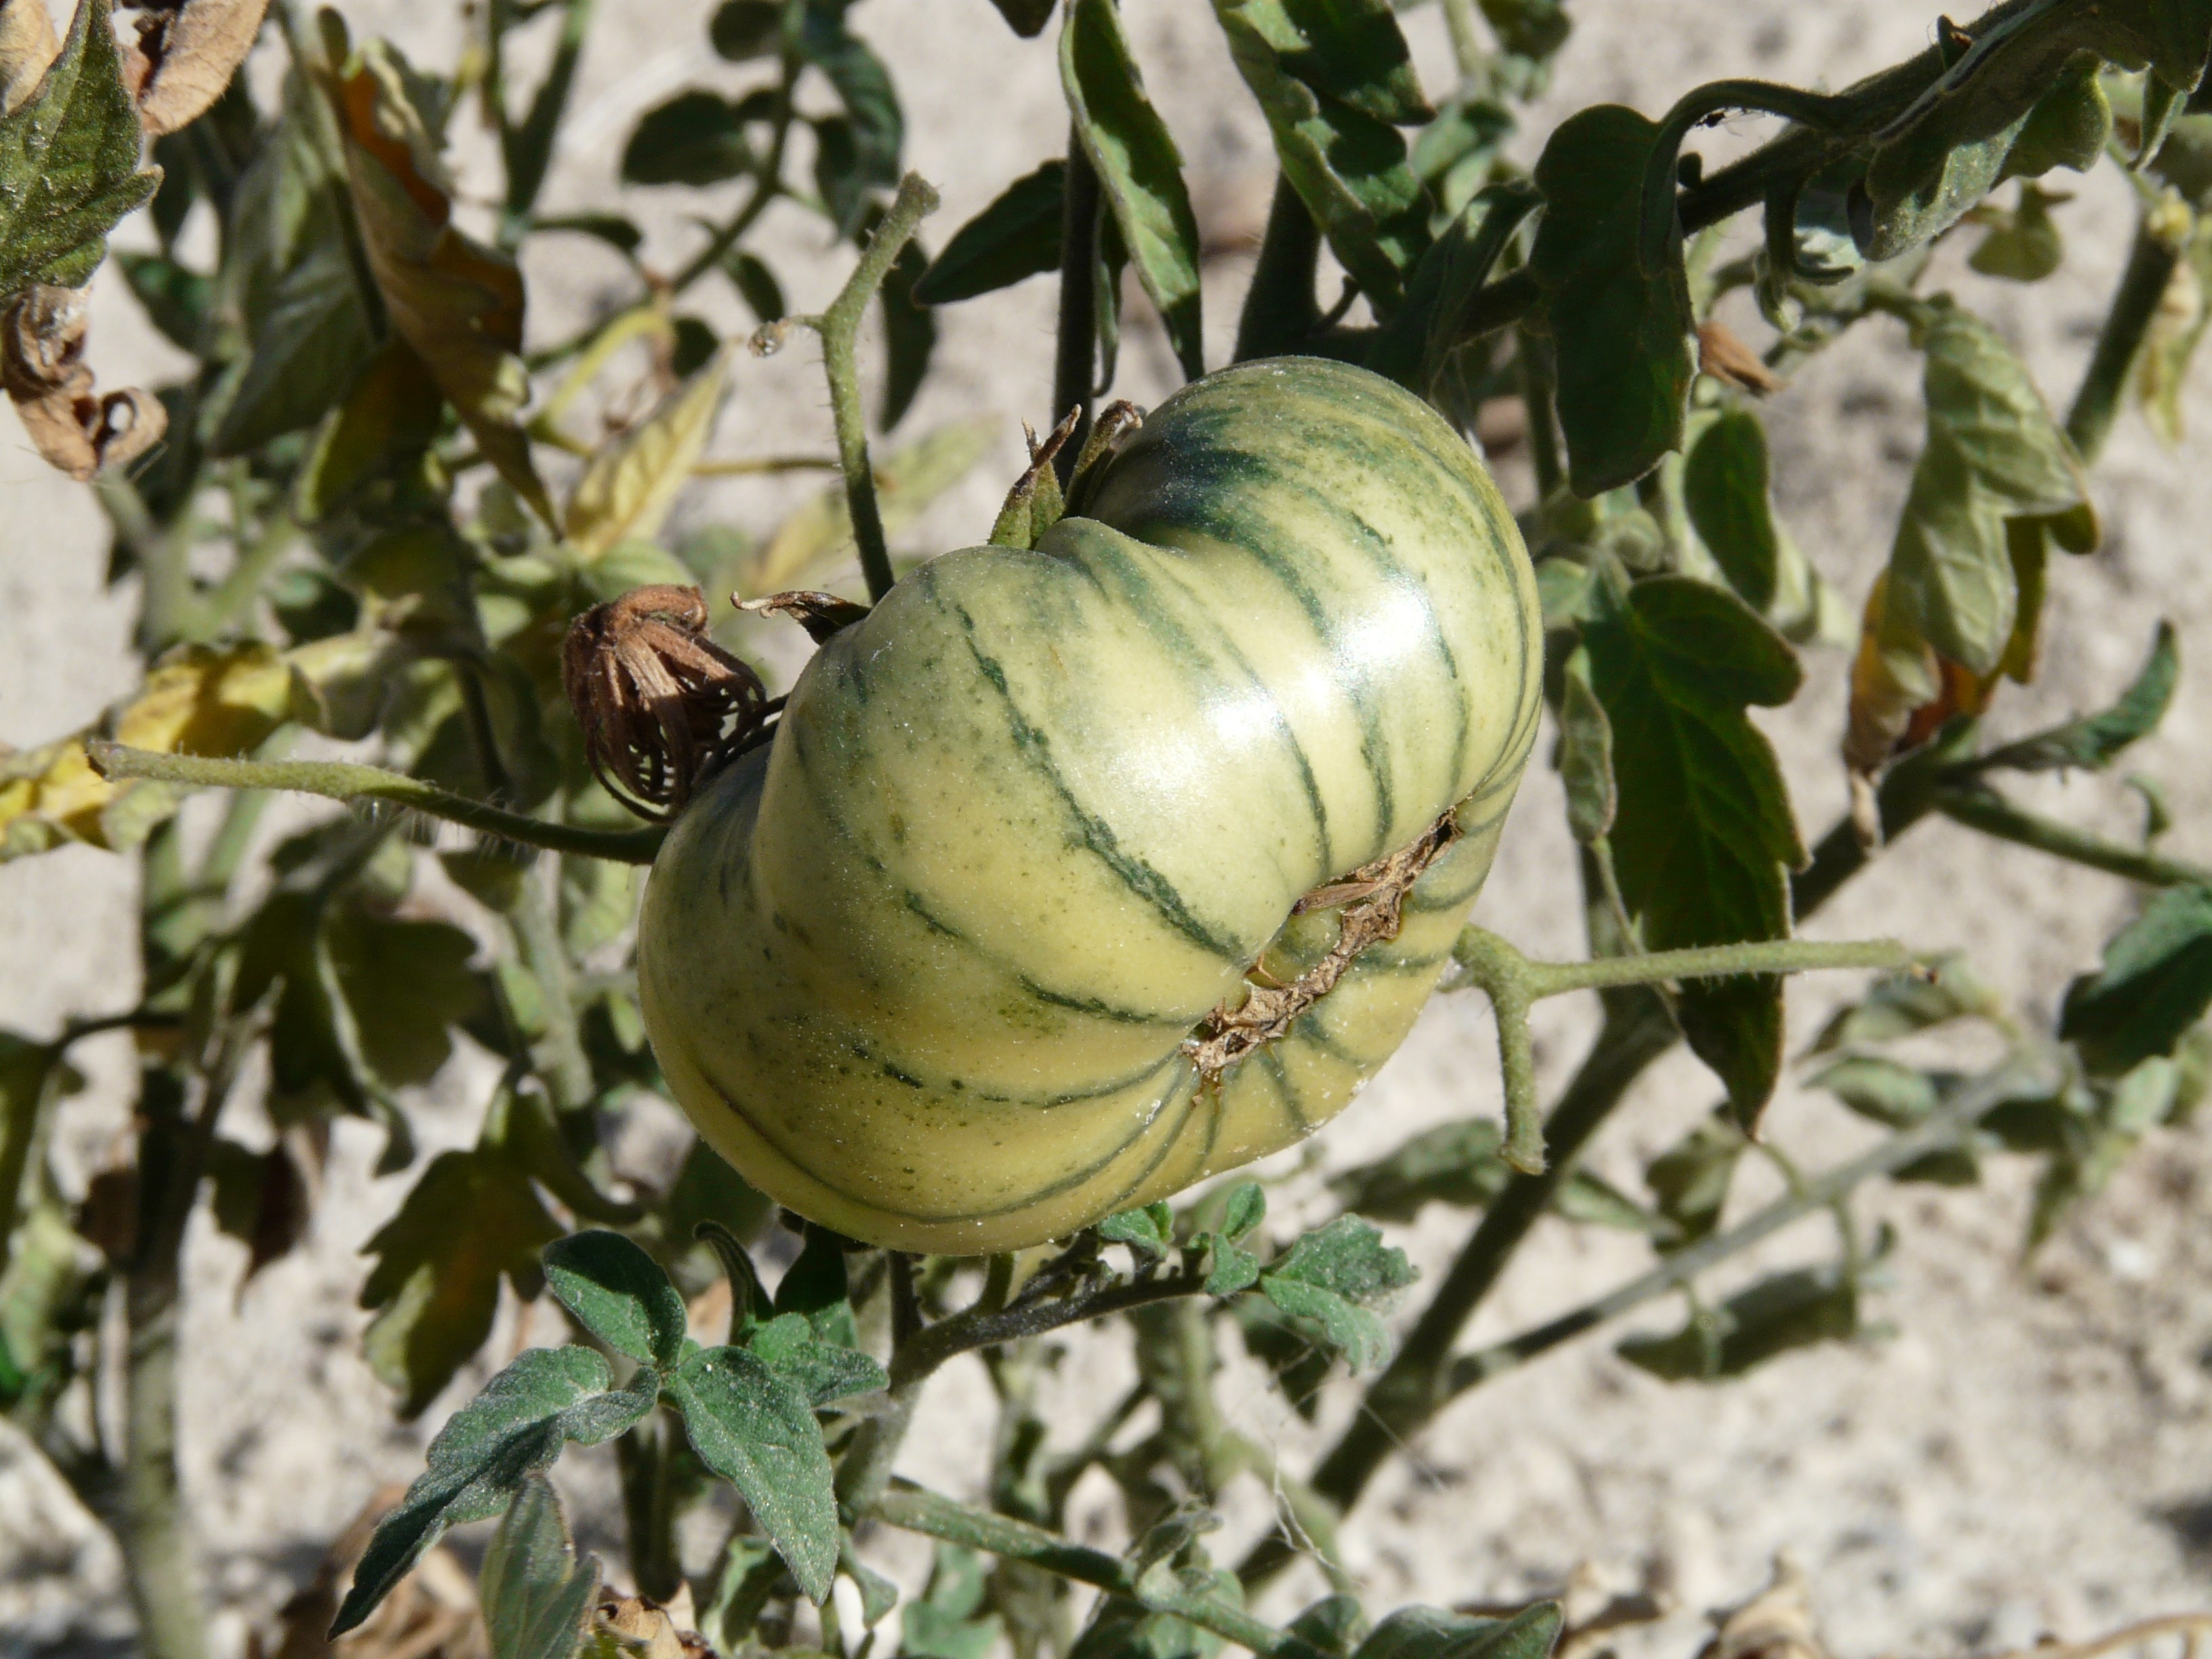 green and beige round fruit